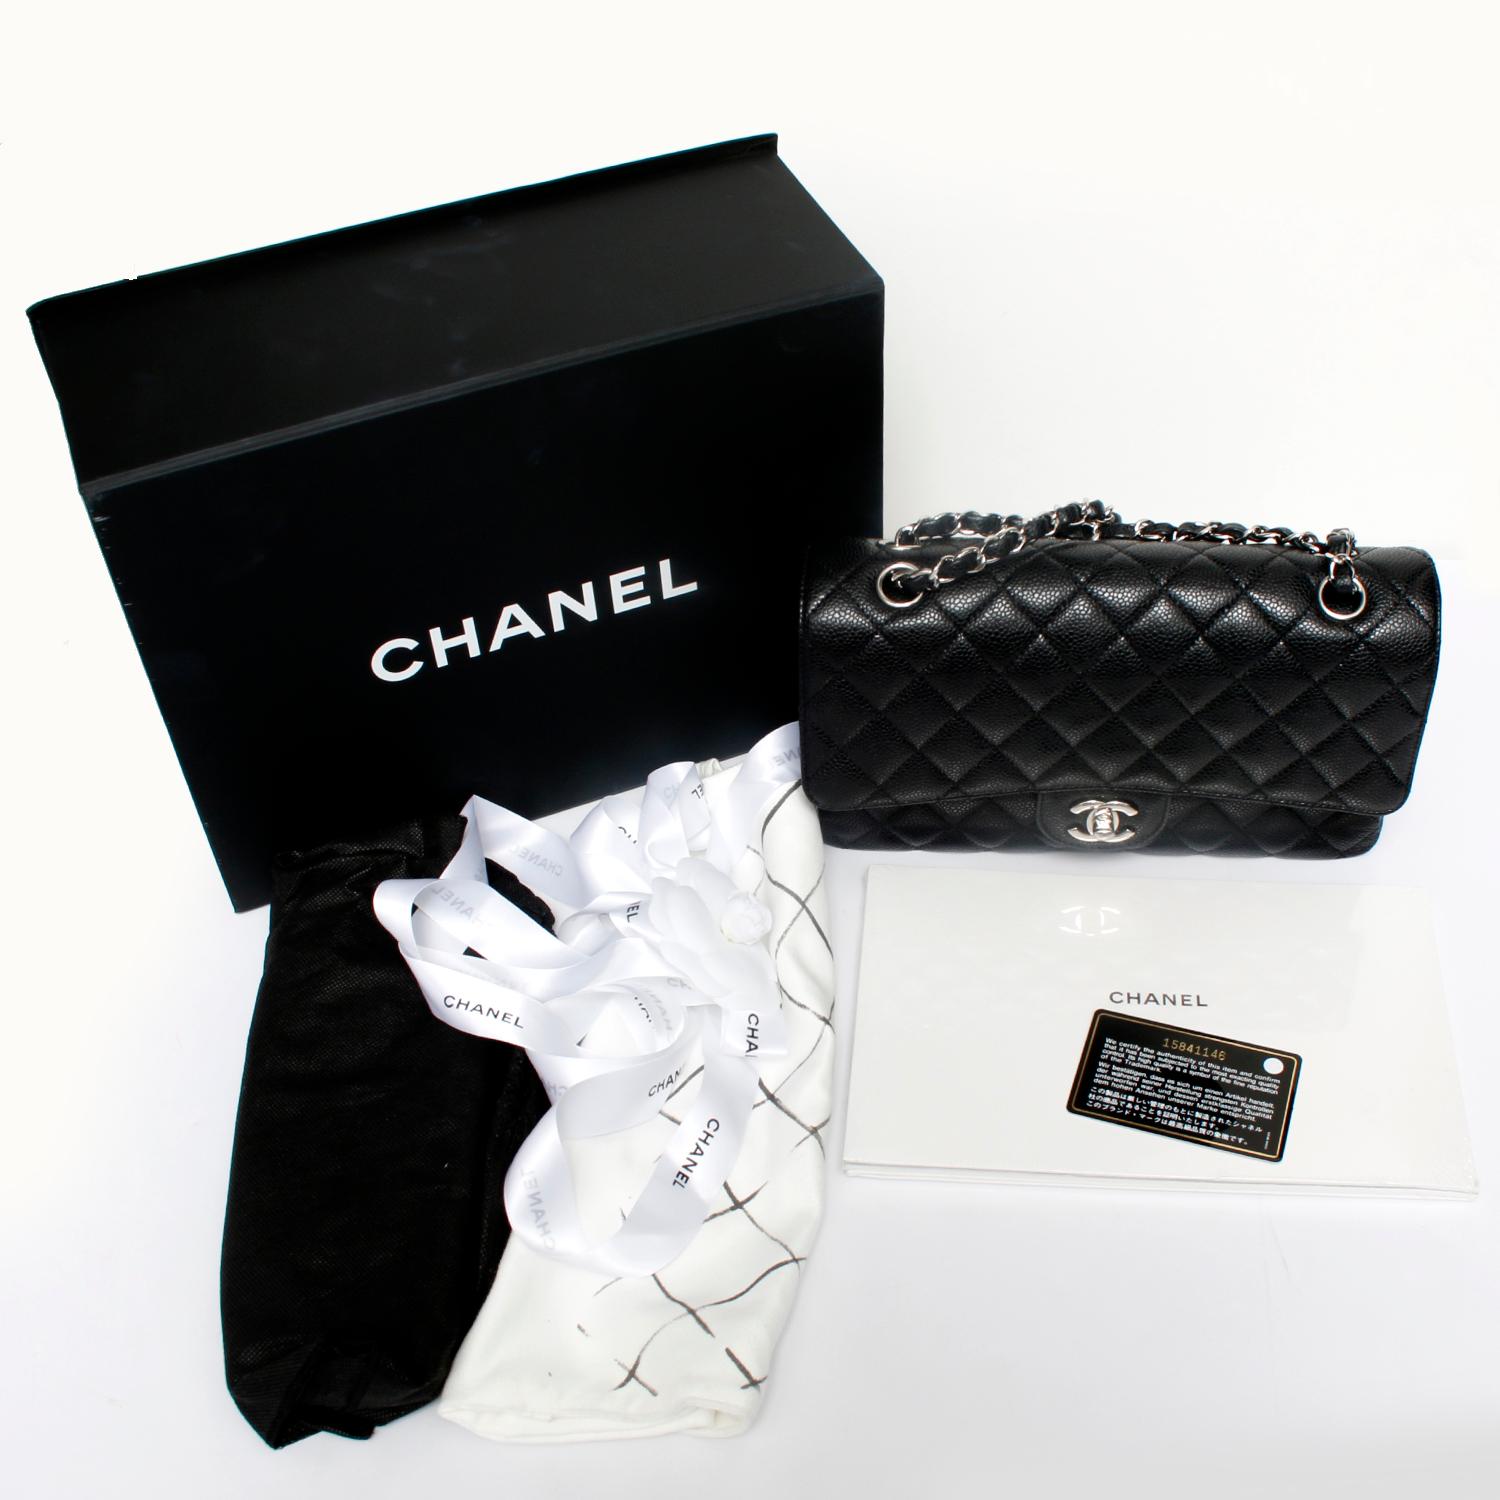 Chanel Black Quilted Caviar Medium Double Flap Bag  - This bag features a front flap with signature CC turnlock closure, a half moon back pocket, and an adjustable interwoven silver chain with black leather shoulder/crossbody strap. The interior is